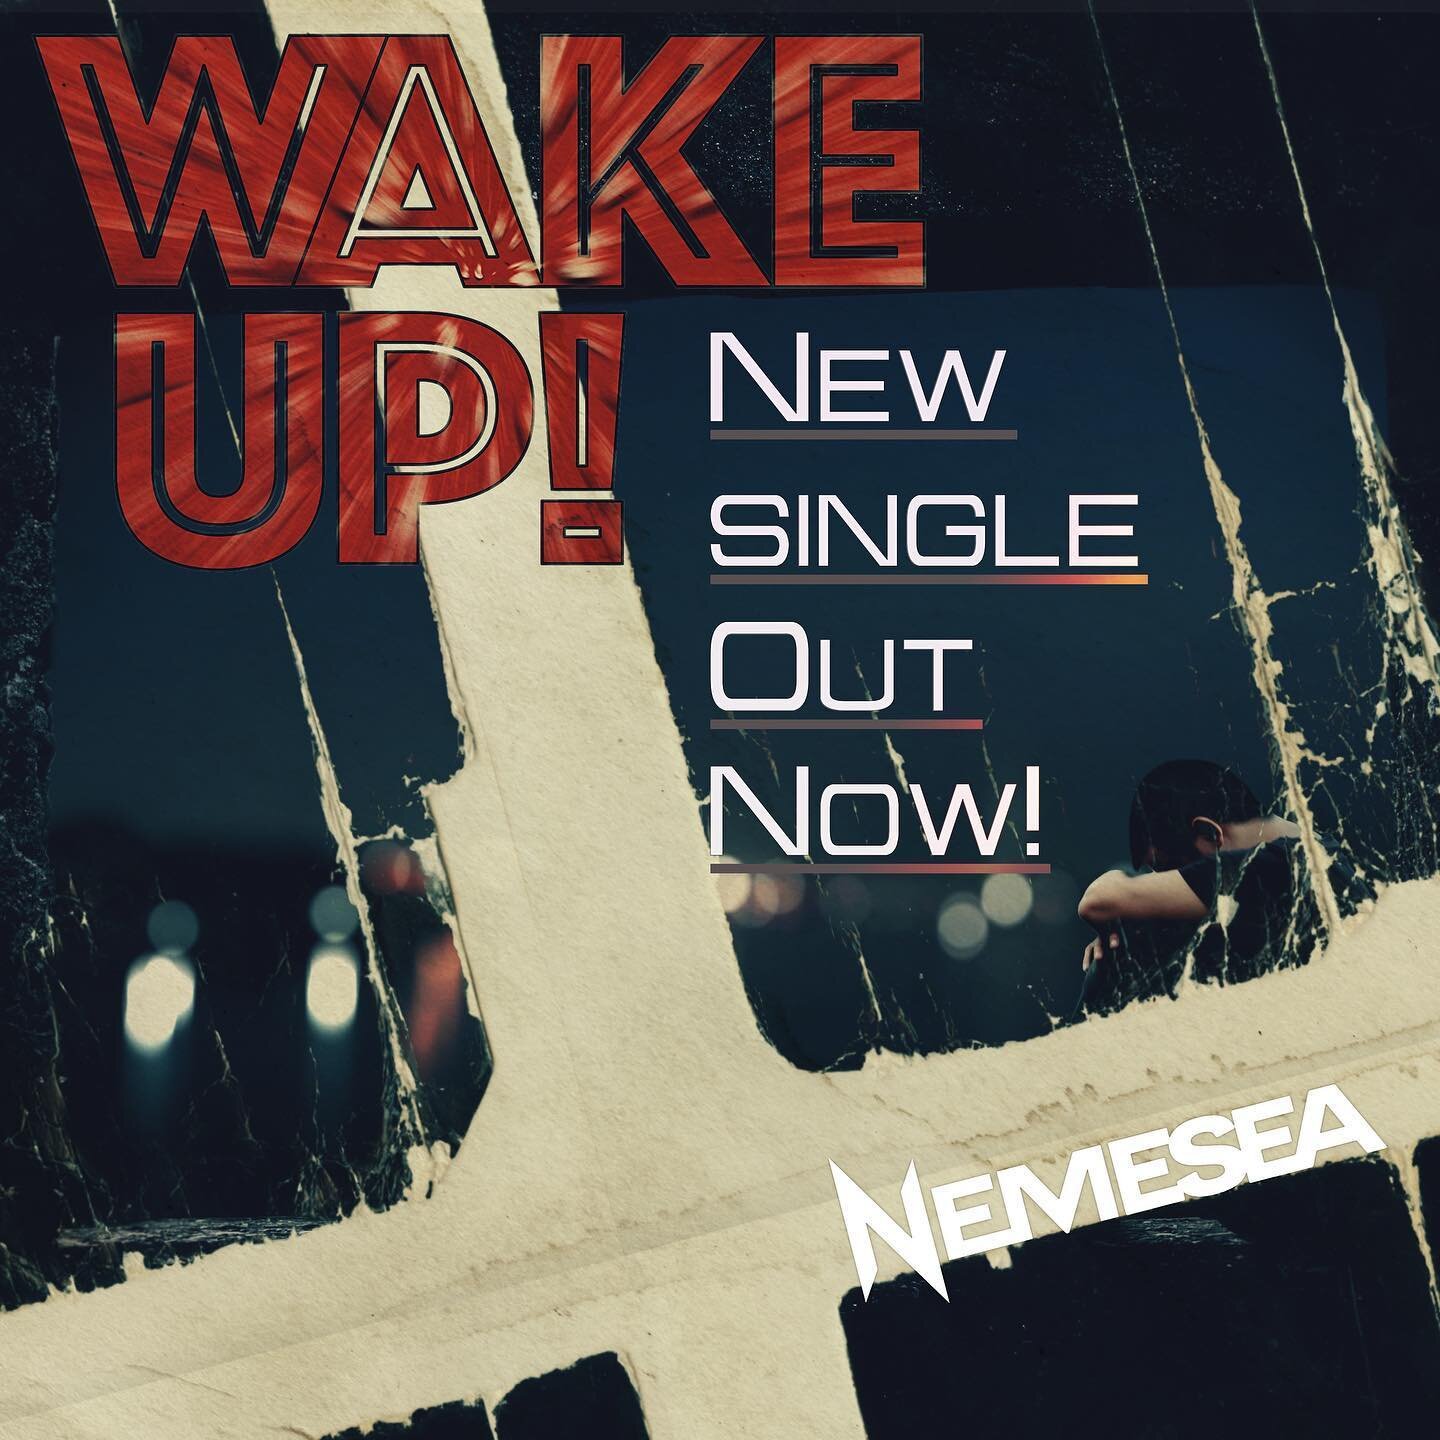 Hey all!
Our new single #wakeup is out there so head out to your fav music outlet and have a listen. 🎧
Like it? Please add it to your #playlist 🙏 Thanks! 🤘🏼💥🤘🏼
Spotify link in bio. .
.
.
.
.
.
.
#newsingle #wakeup #spotify #spotifyplaylist #sp